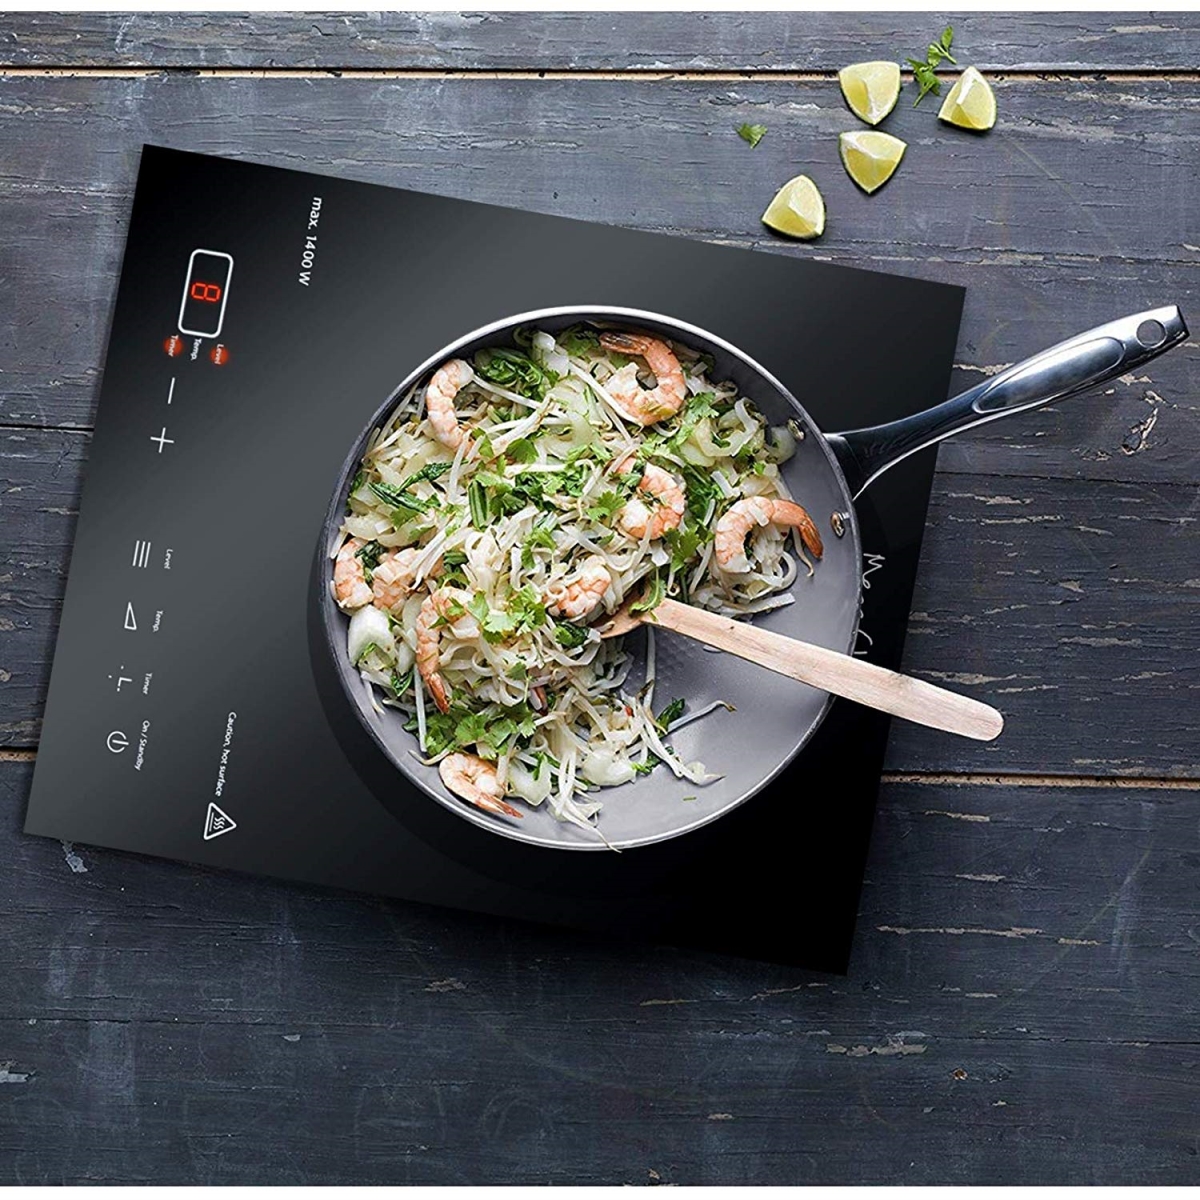 Picture of Megachef MC-1400 Portable 1400W Single Induction Cooktop with Digital Control Panel - Black